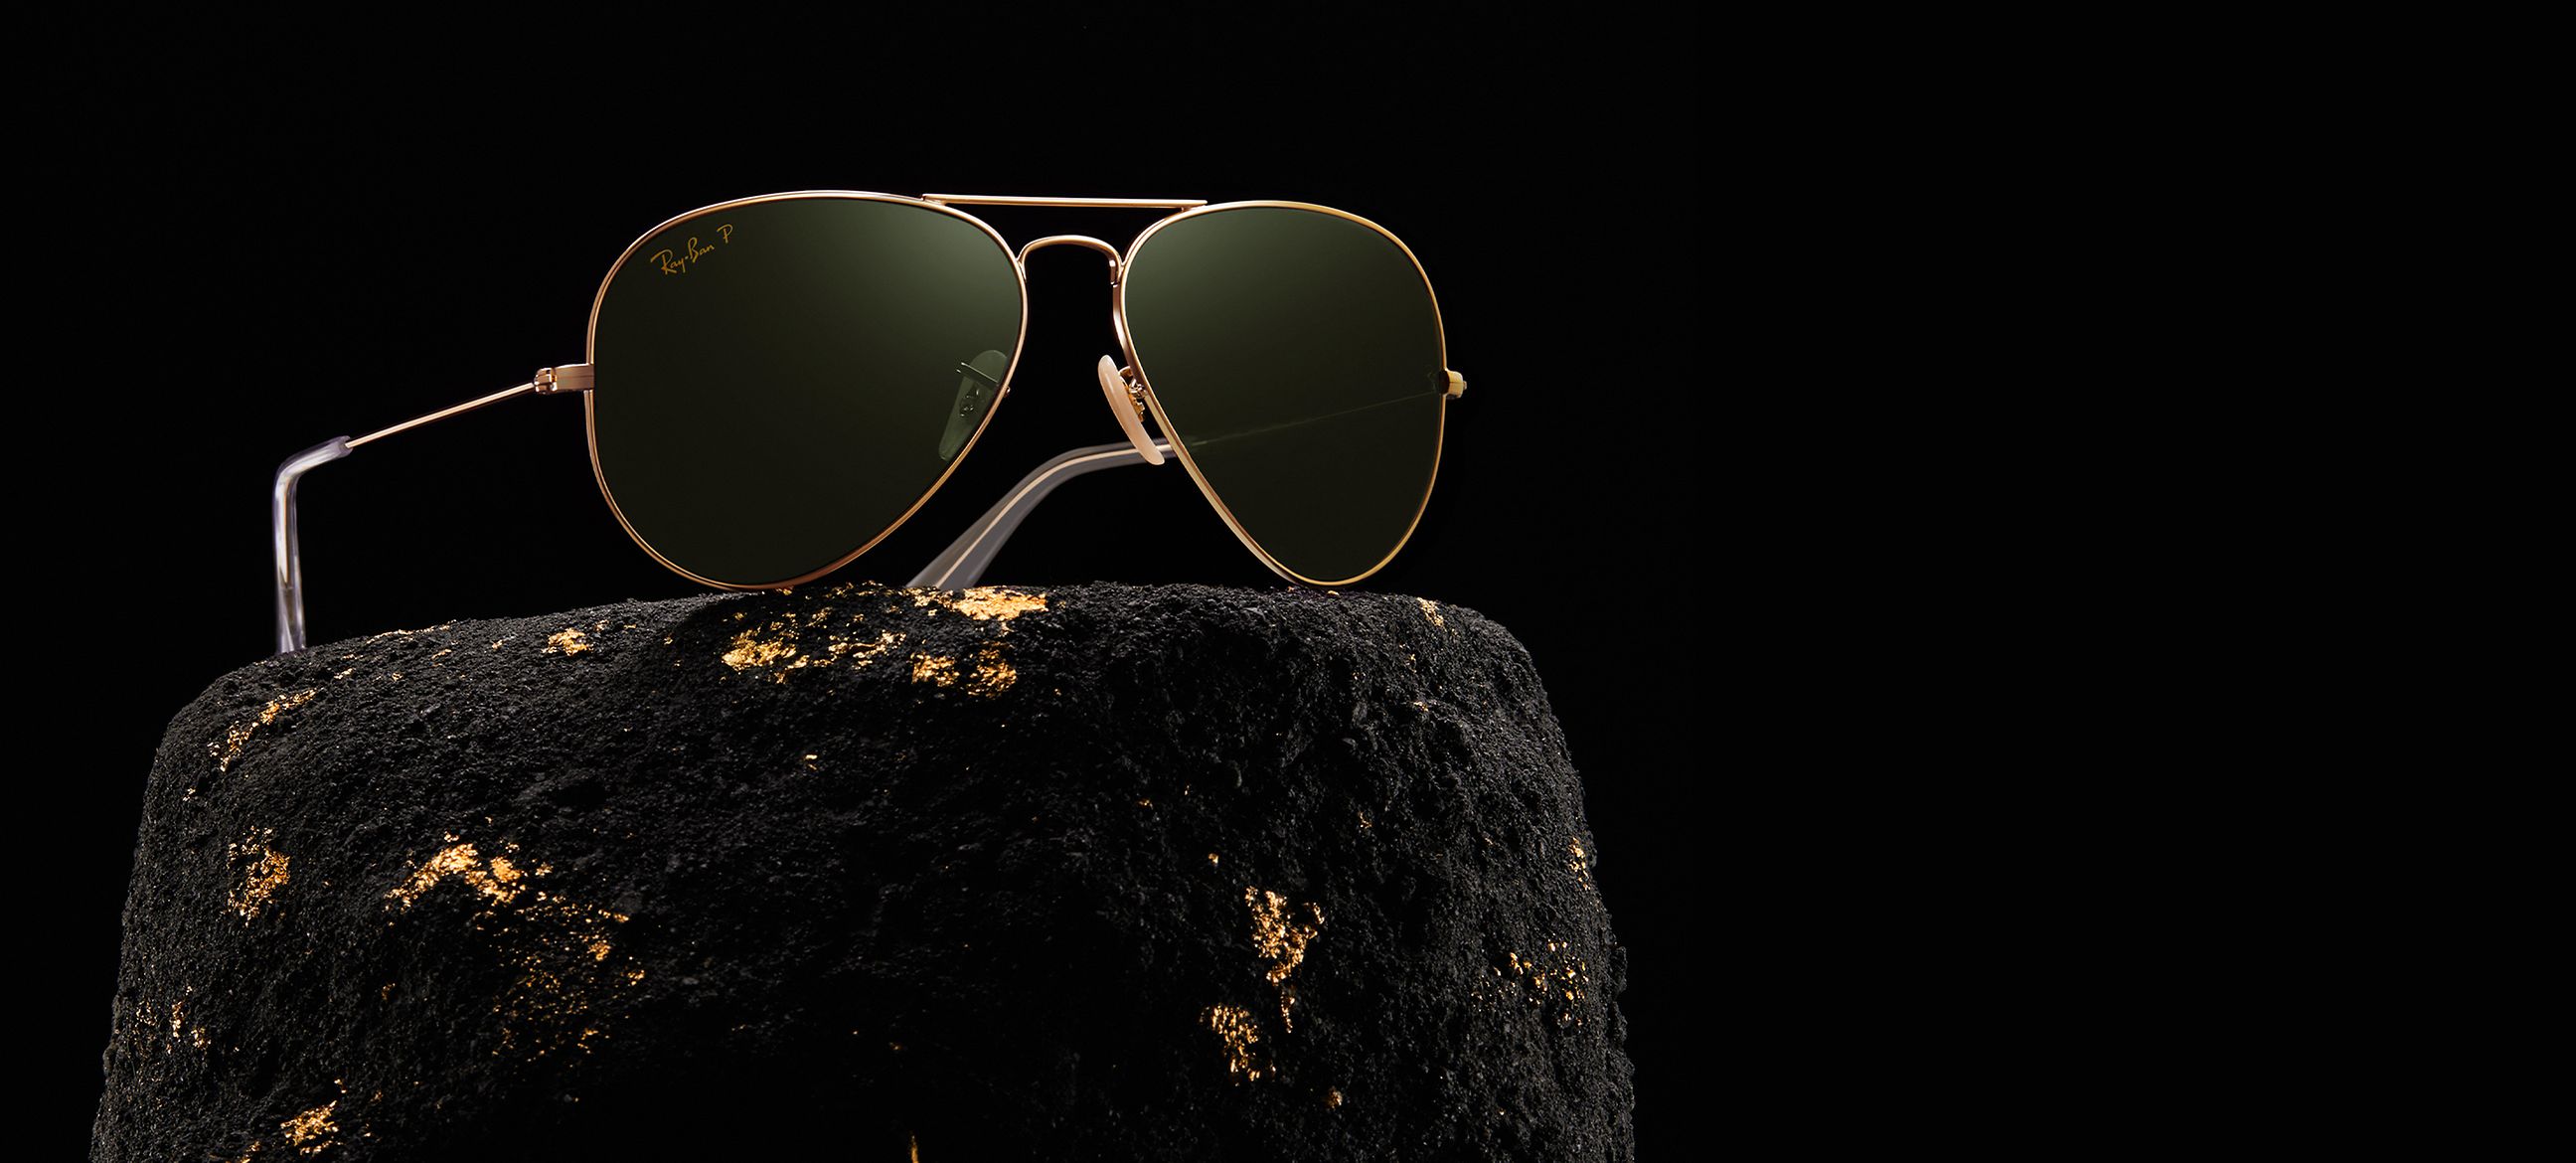 Ray-Ban Limited
AVIATOR SOLID GOLD